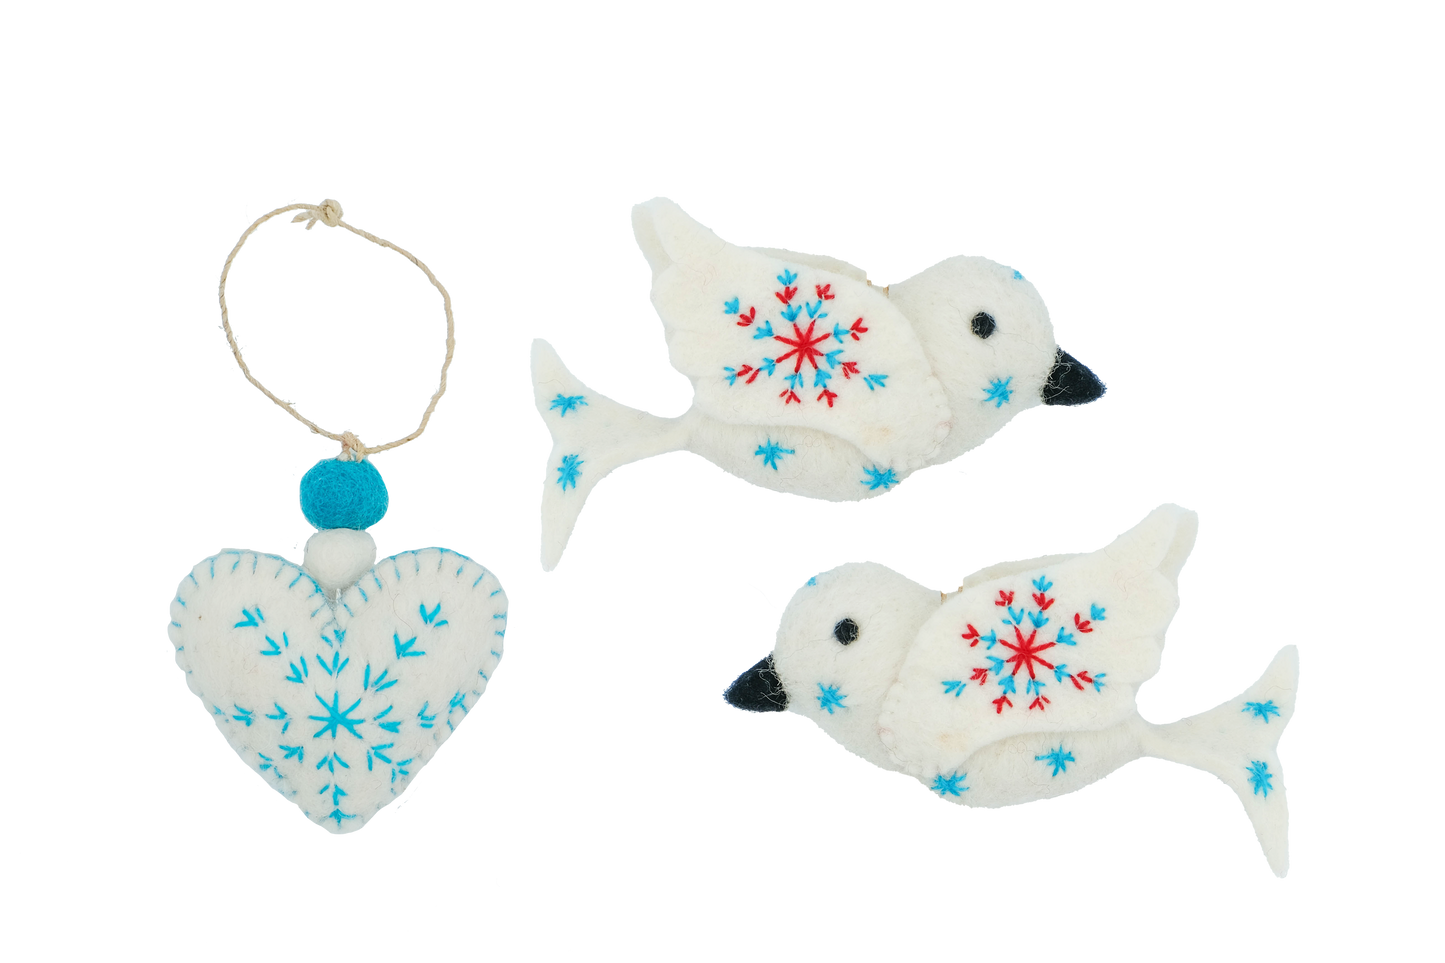 Two Turtle Doves + Love Heart Handcrafted Embroidered Felt Ornaments-Set of 3